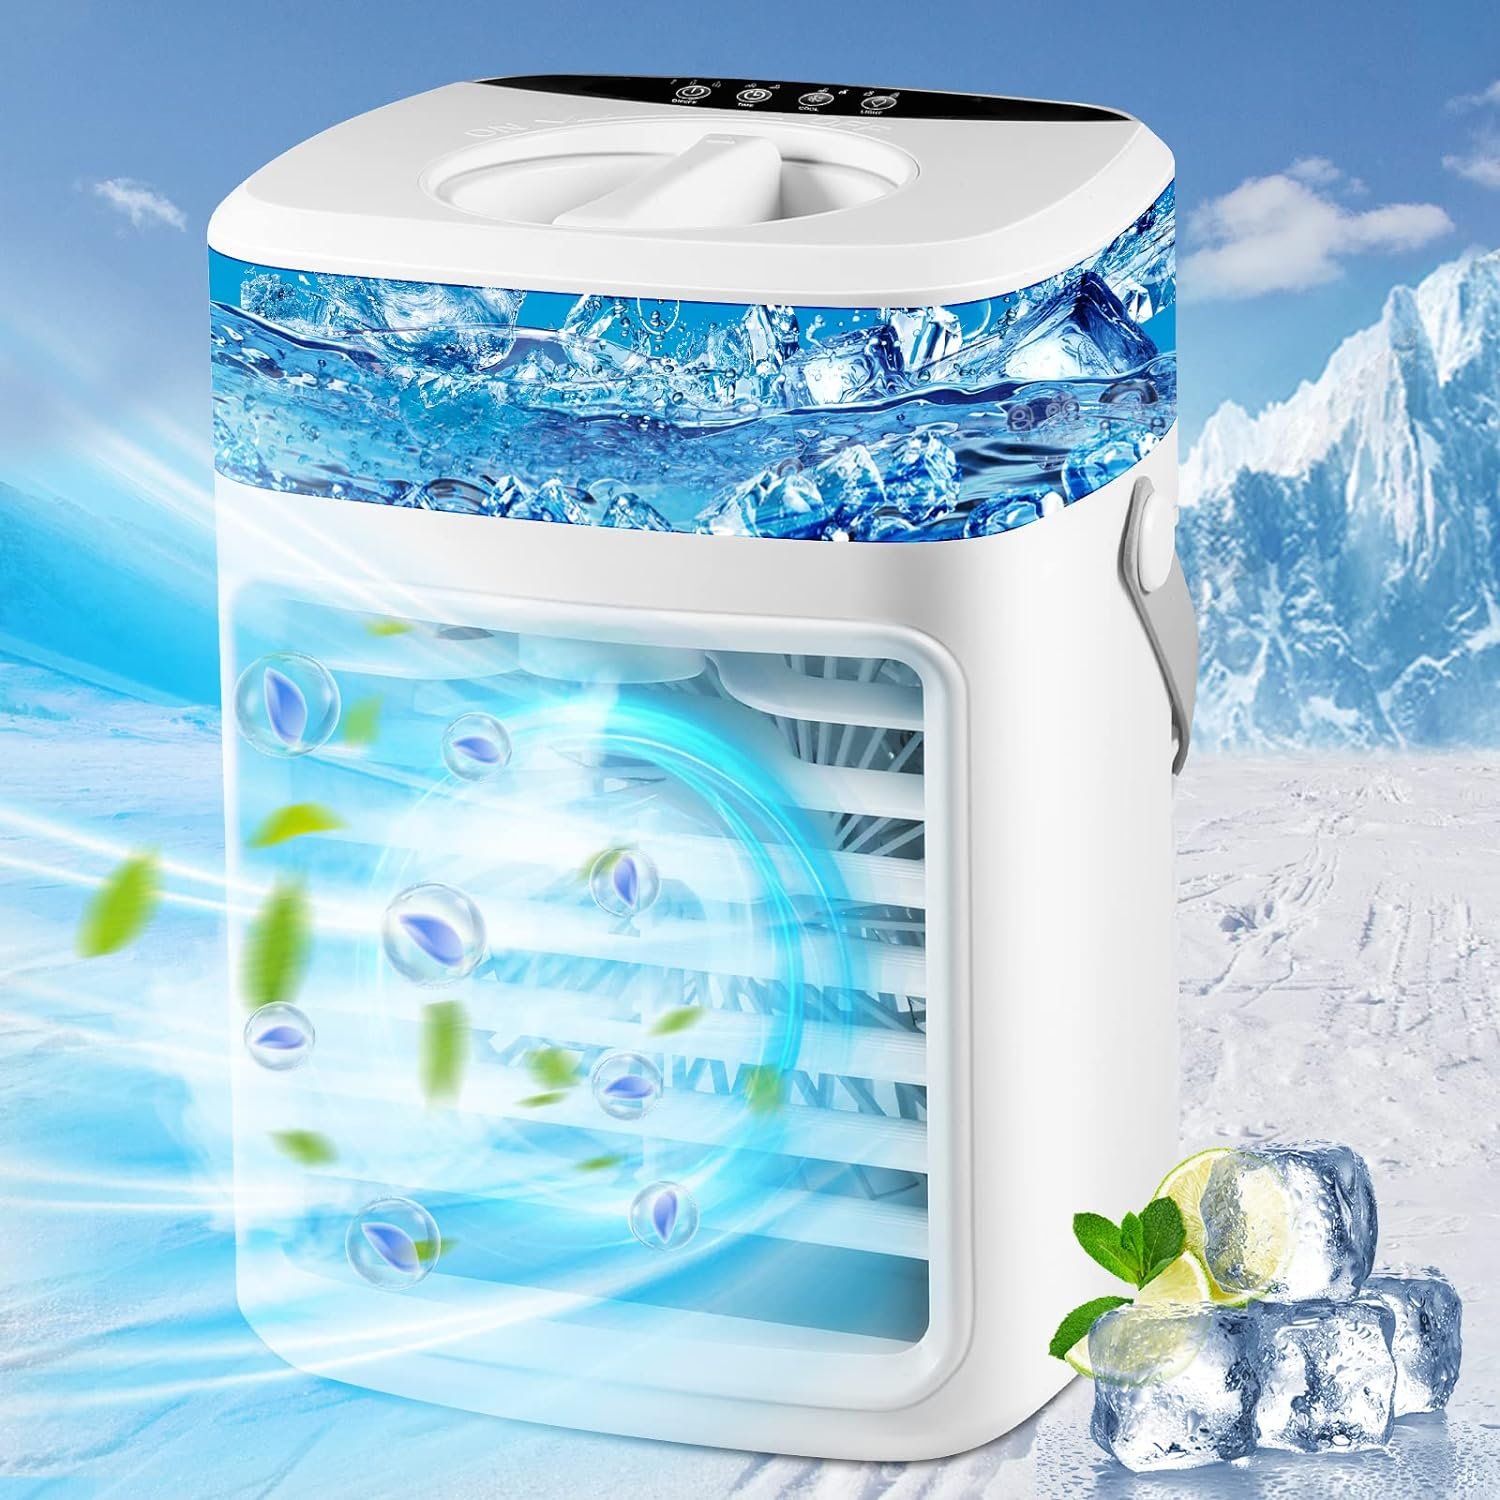 Portable Air Conditioner Fan Review